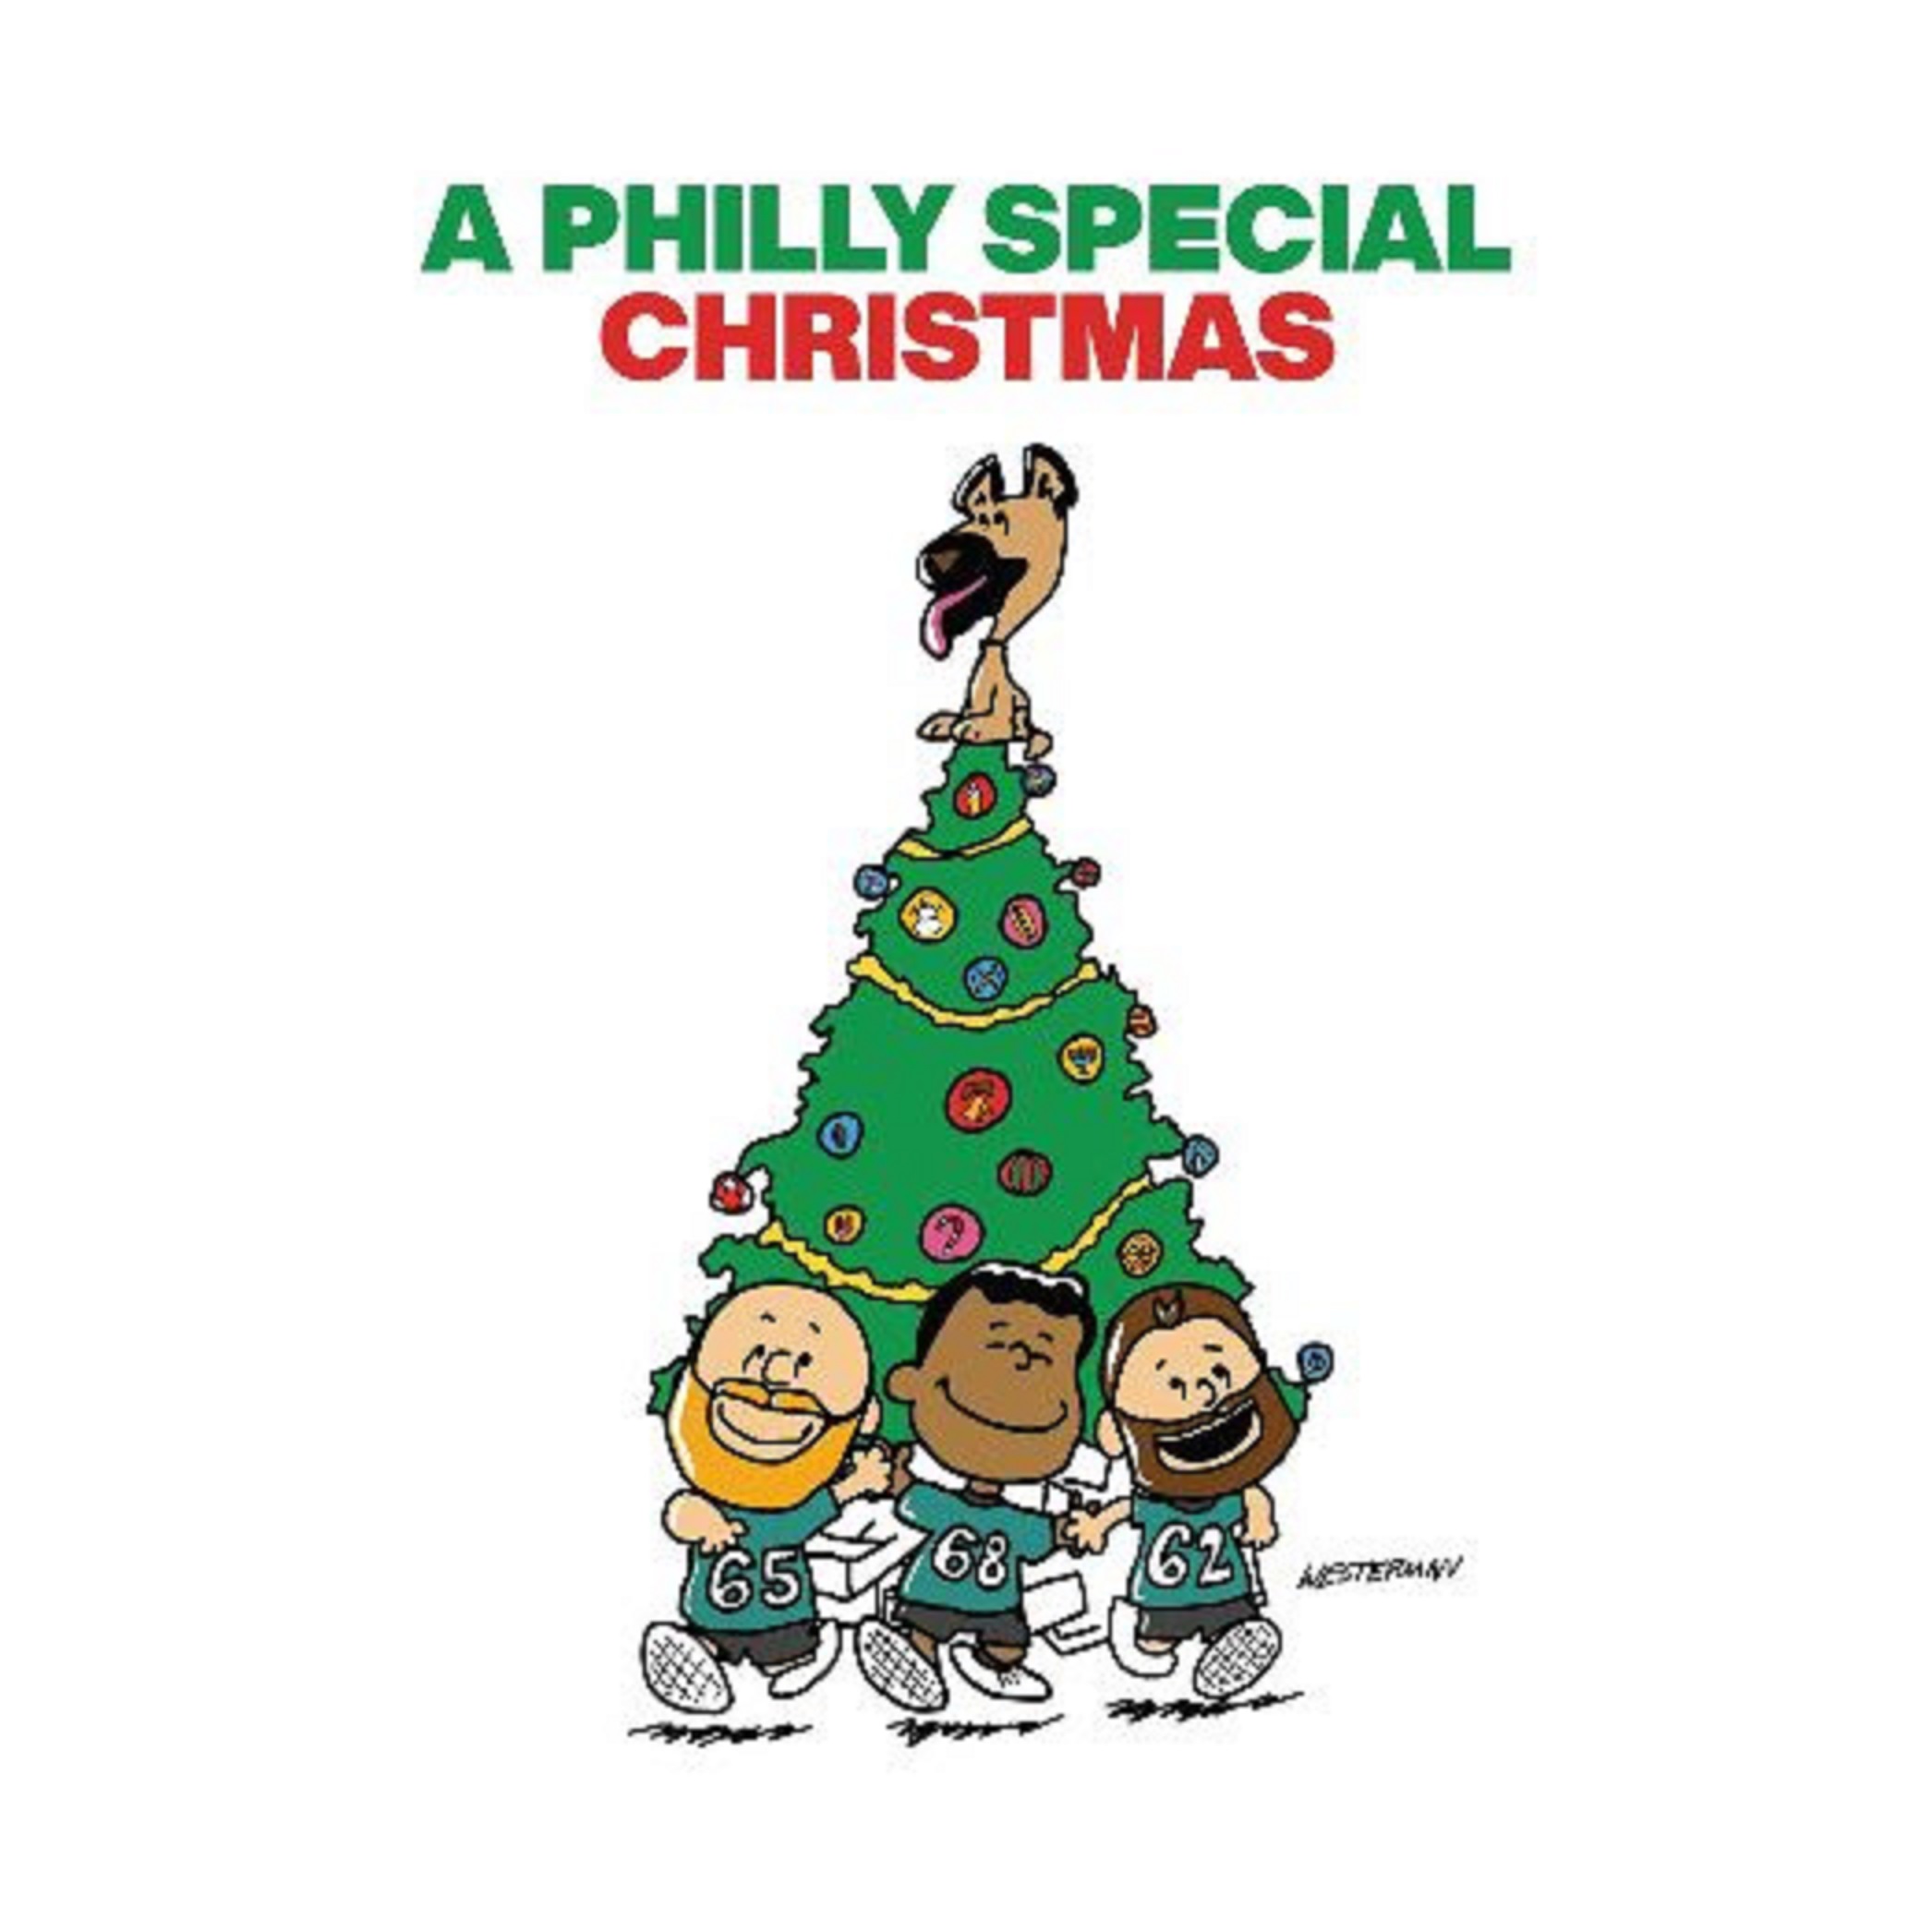 A Philly Special Christmas Announces 3rd Limited Edition Vinyl Pressing